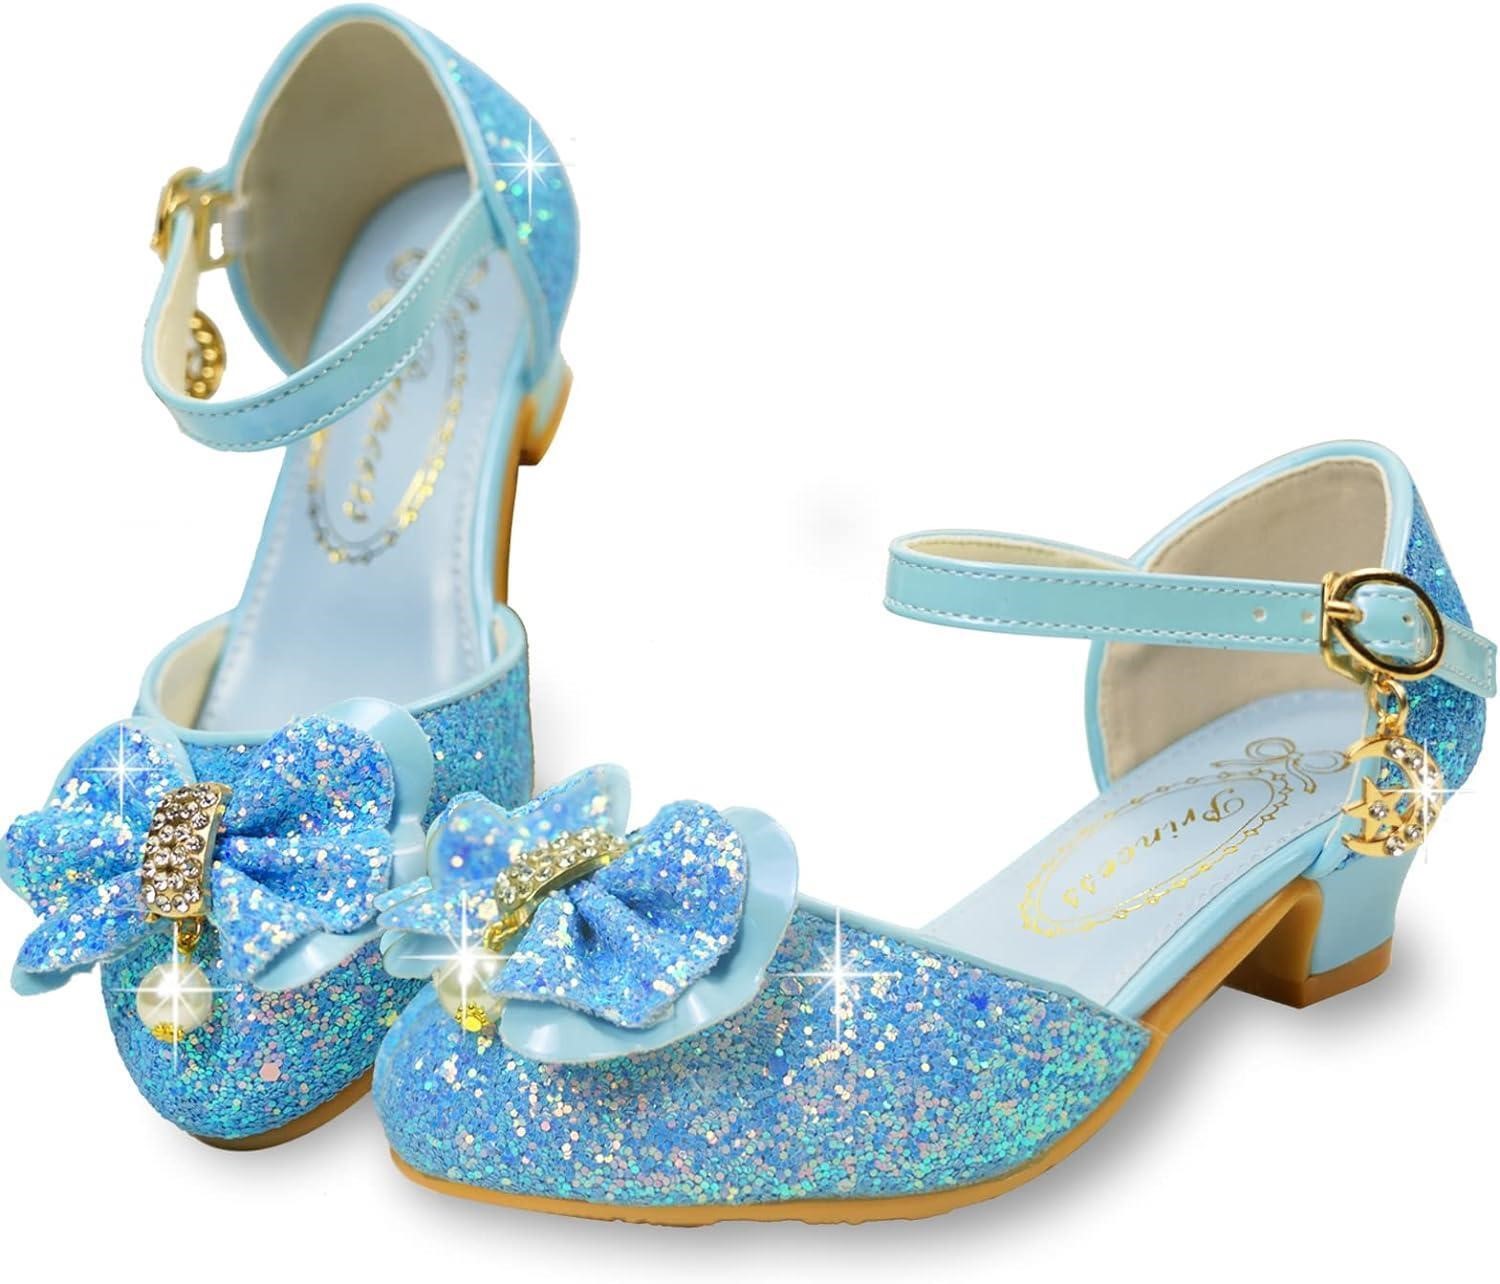 Girl's Glitter Ballet & Party Shoes